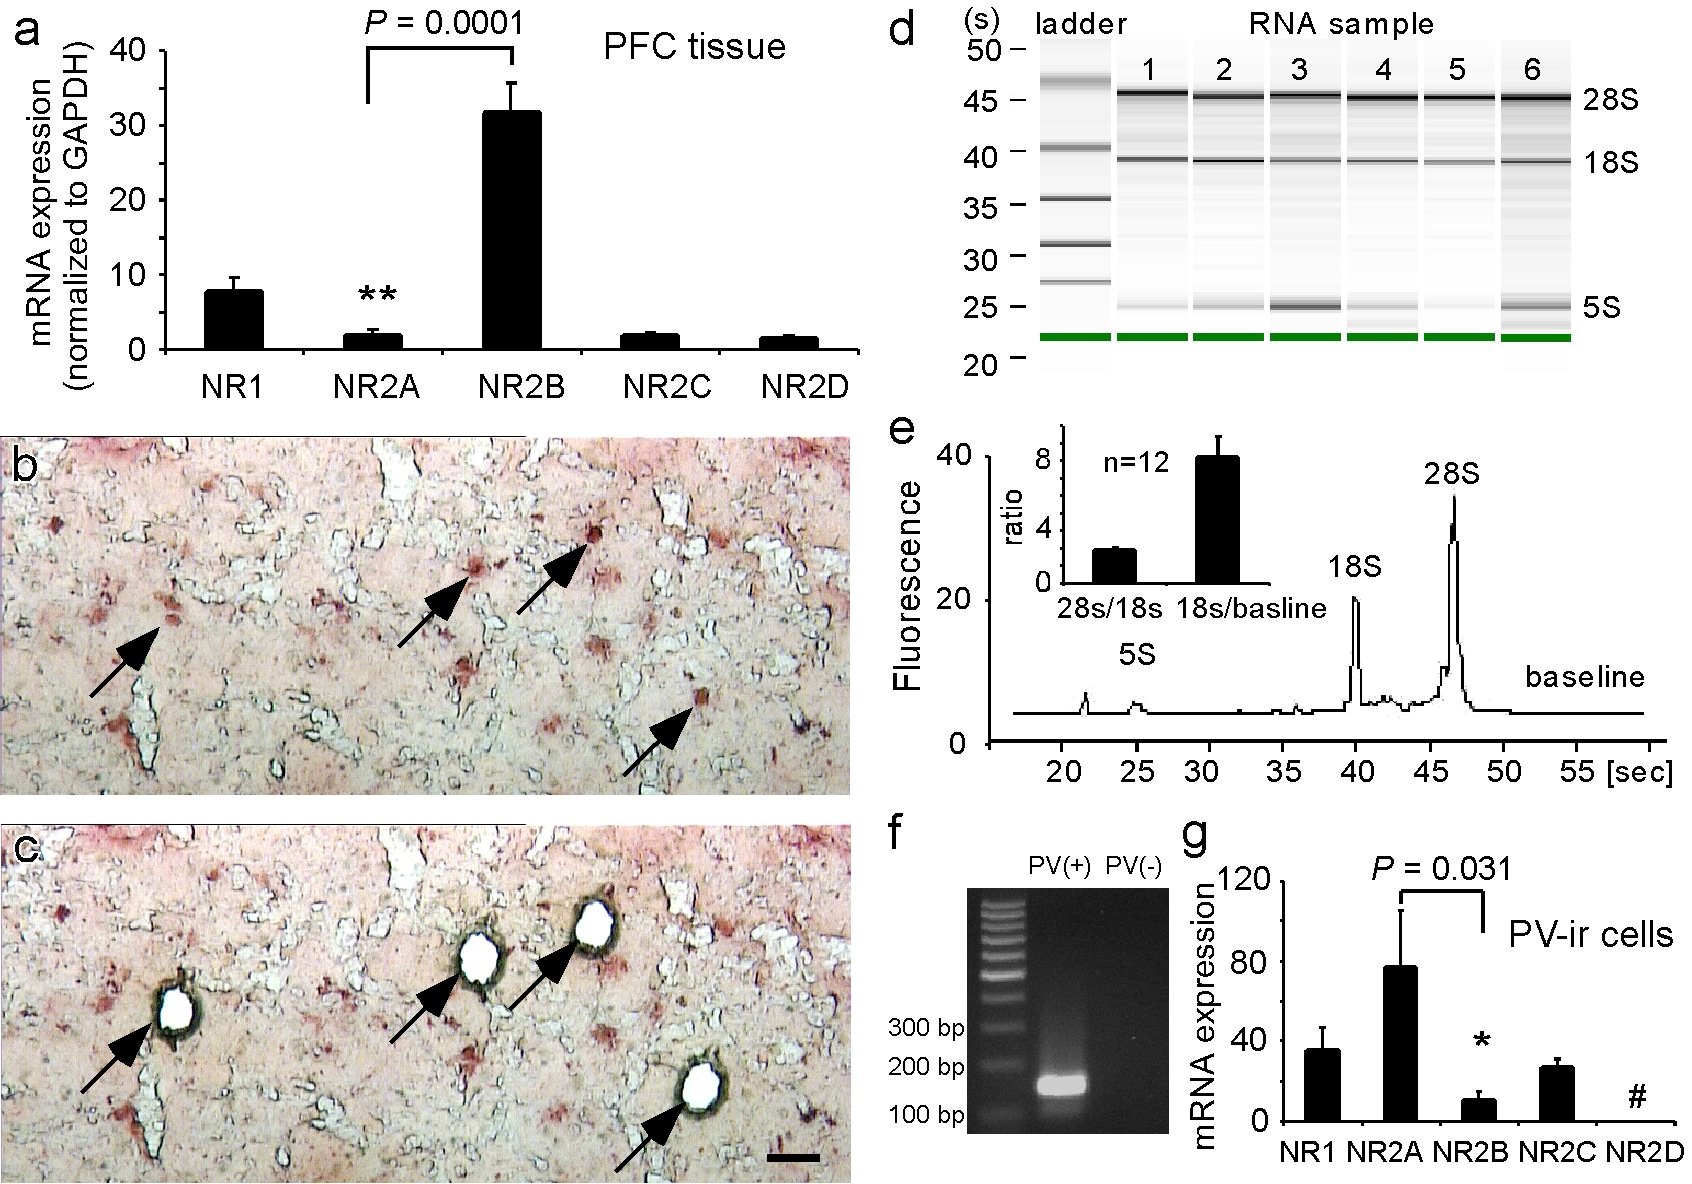 Relative mRNA expression of NMDAR subunits in adult rat PFC and parvalbumin-immunoreactive (PV-ir) interneurons.